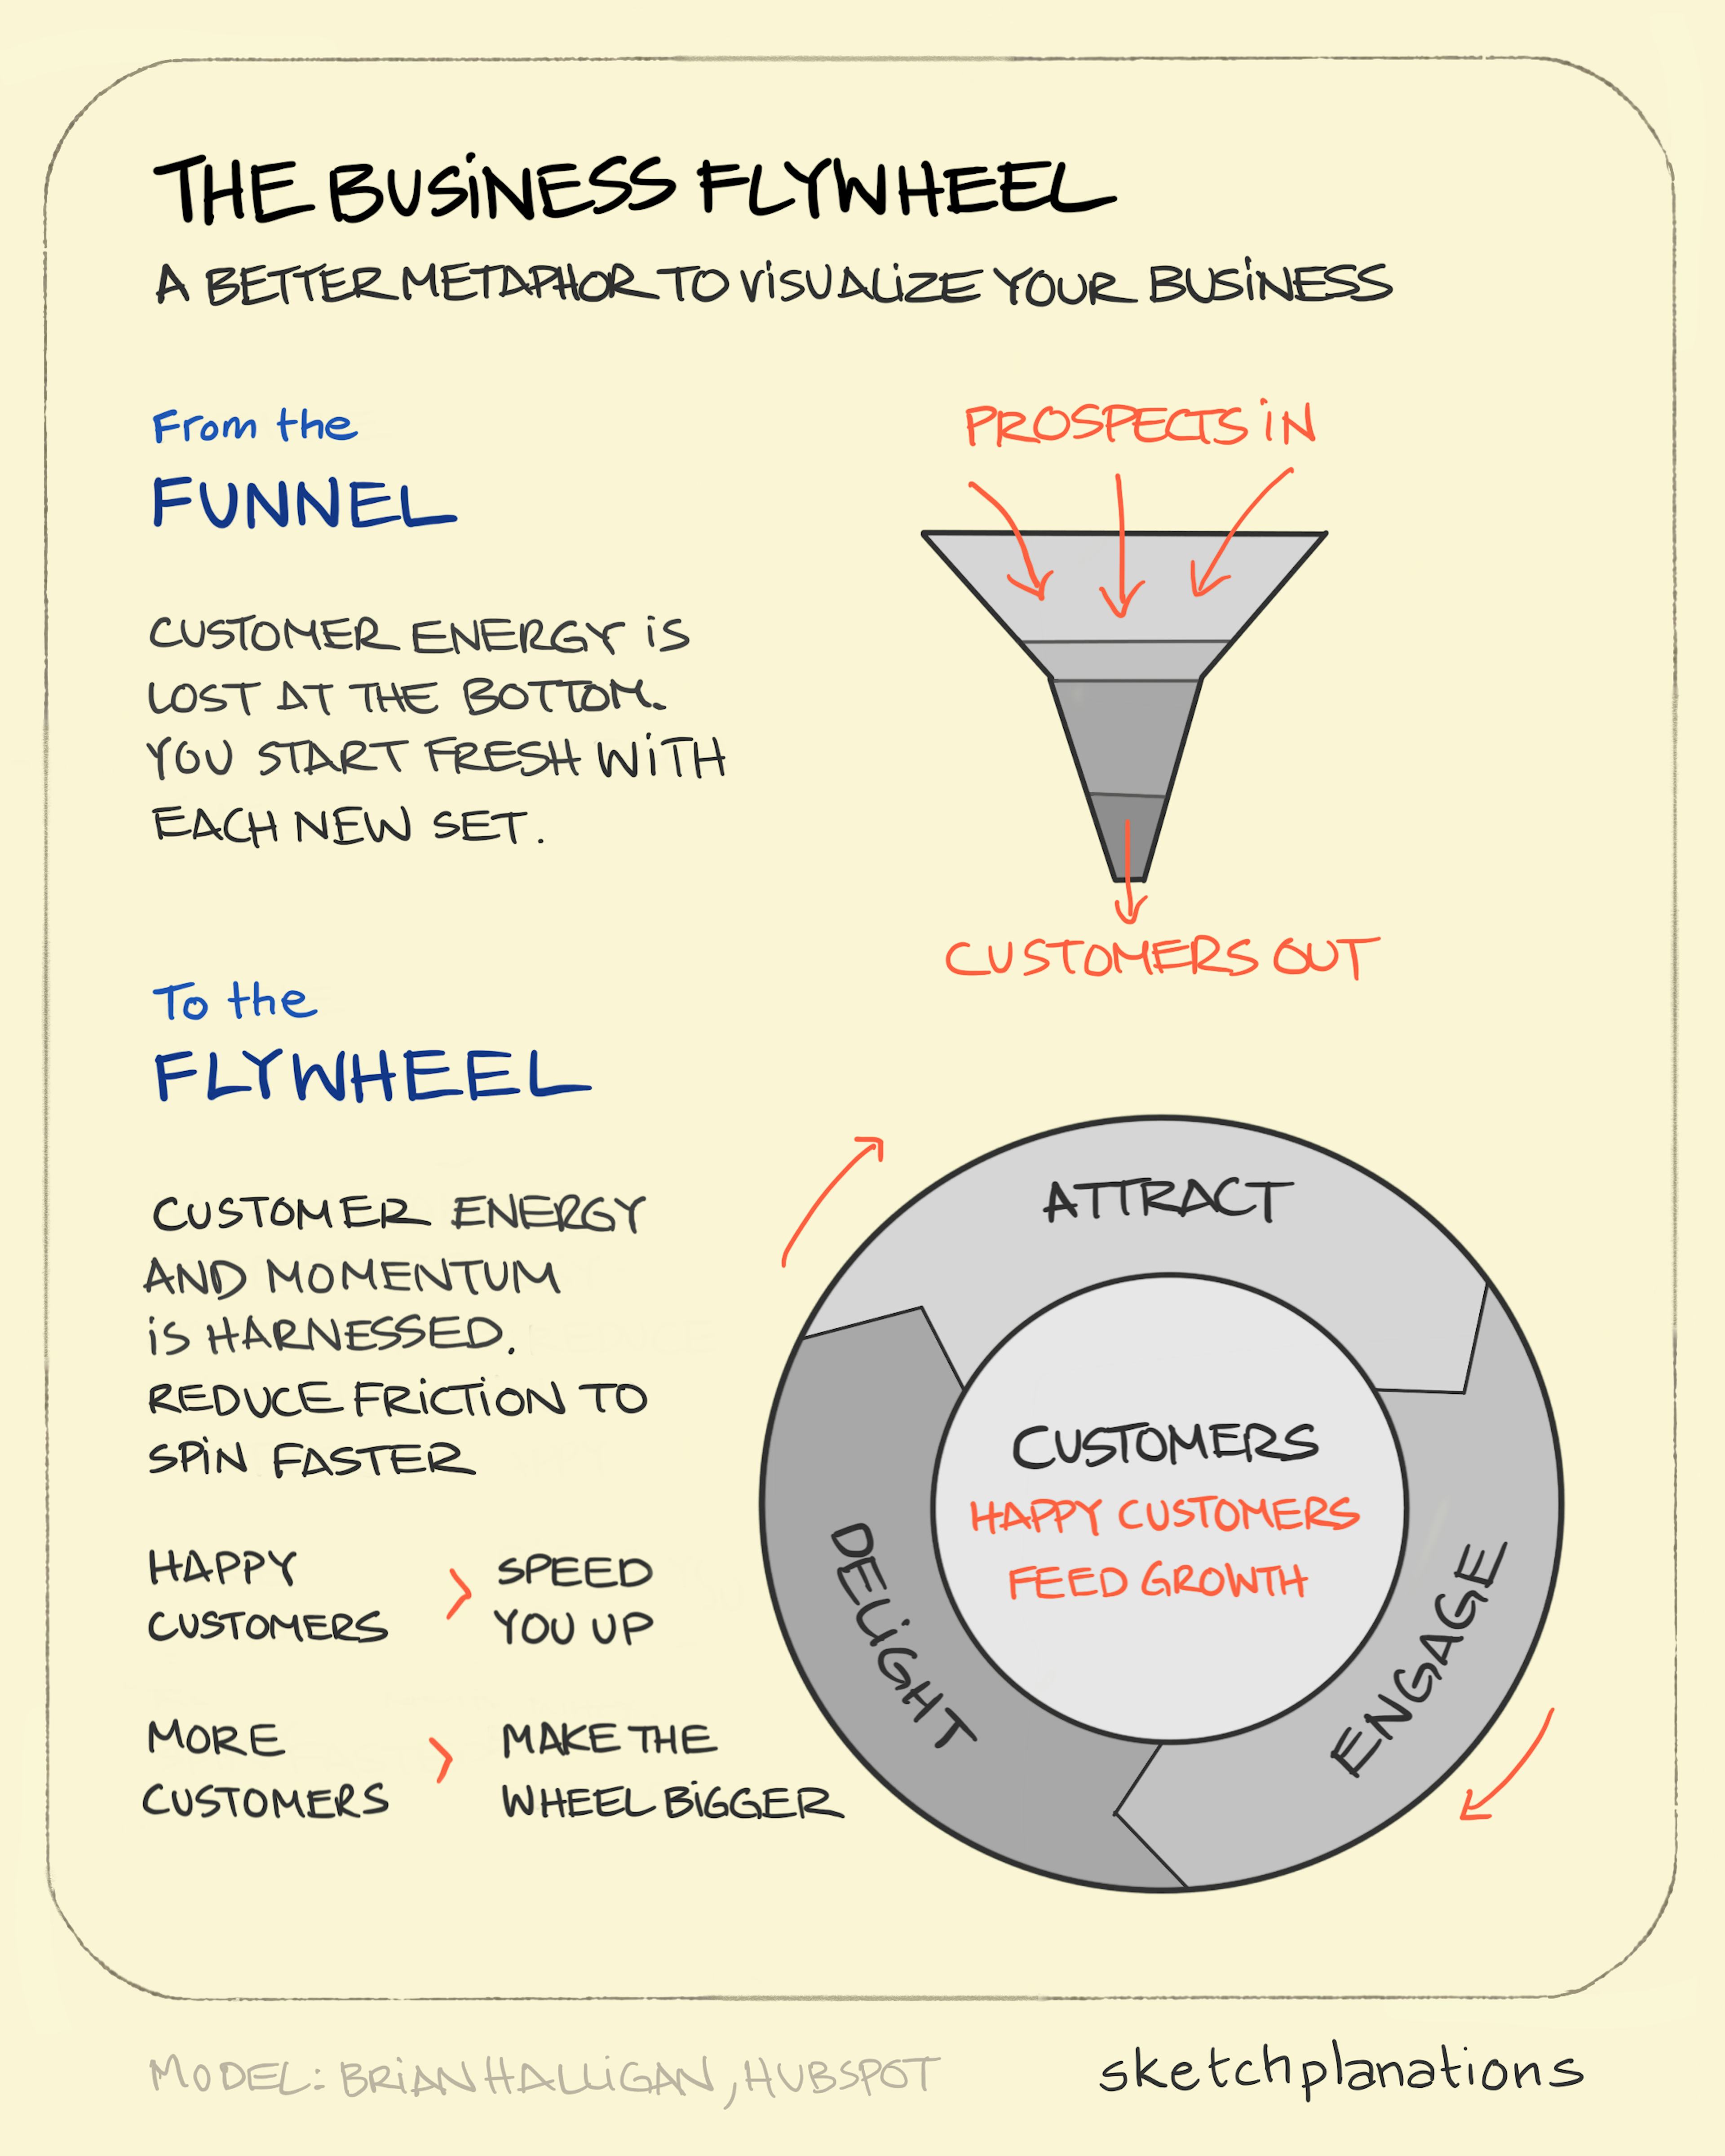 The Business Flywheel illustration: the model of The Business Funnel, where prospects are filtered to yield end customers is compared with The Business Flywheel, where customers are at the centre, acting as the driving force behind your business momentum. 